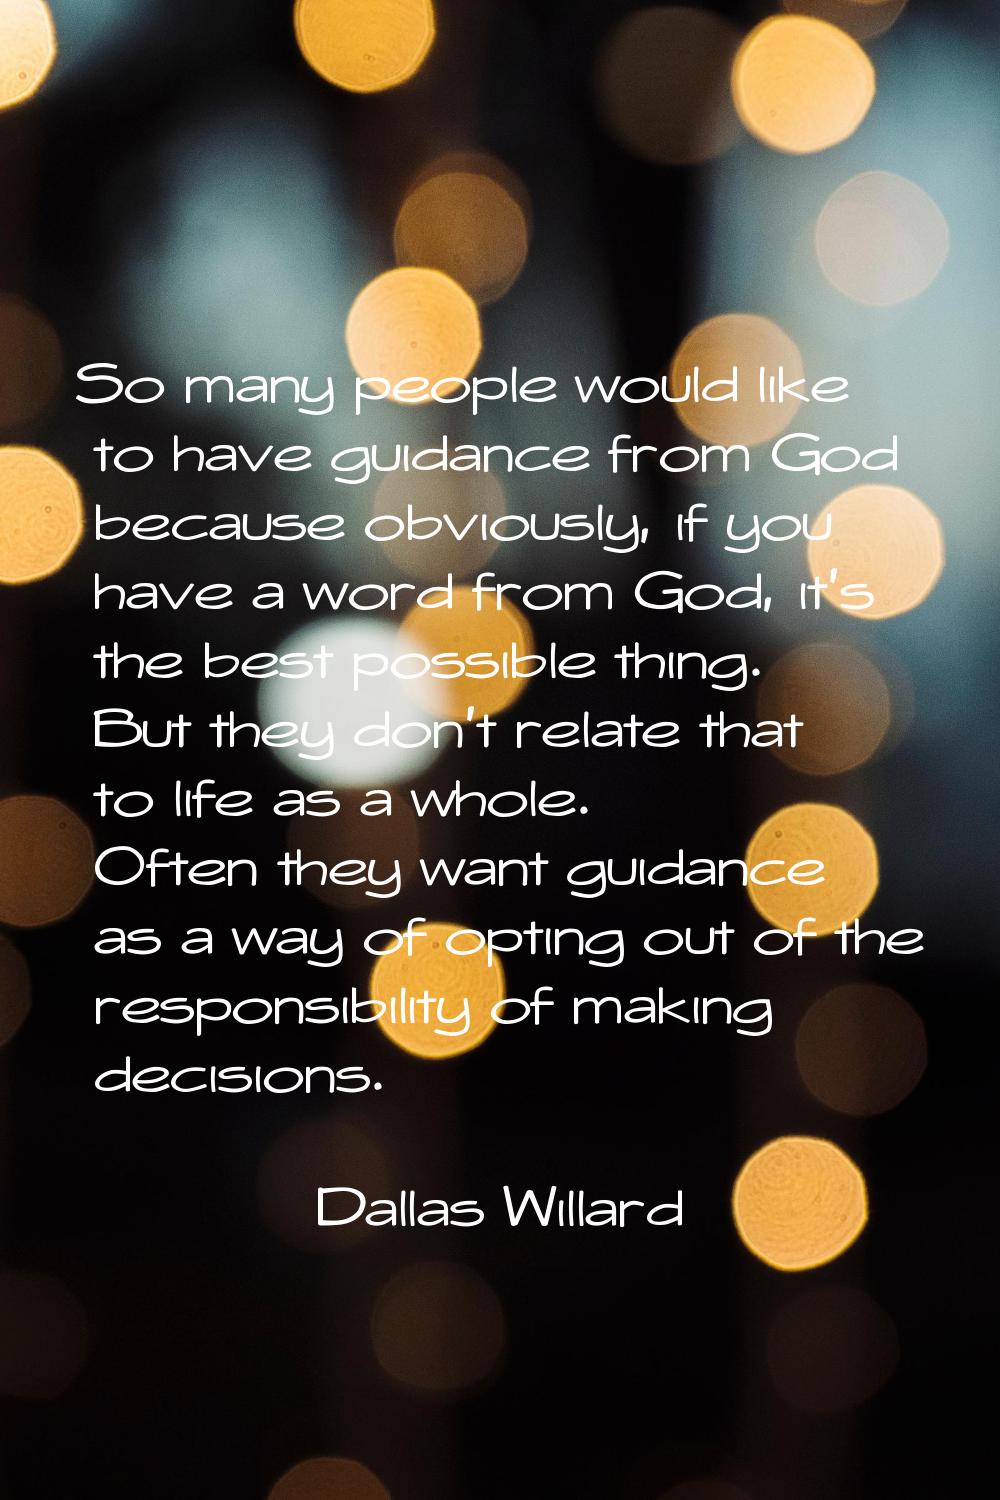 So many people would like to have guidance from God because obviously, if you have a word from God,